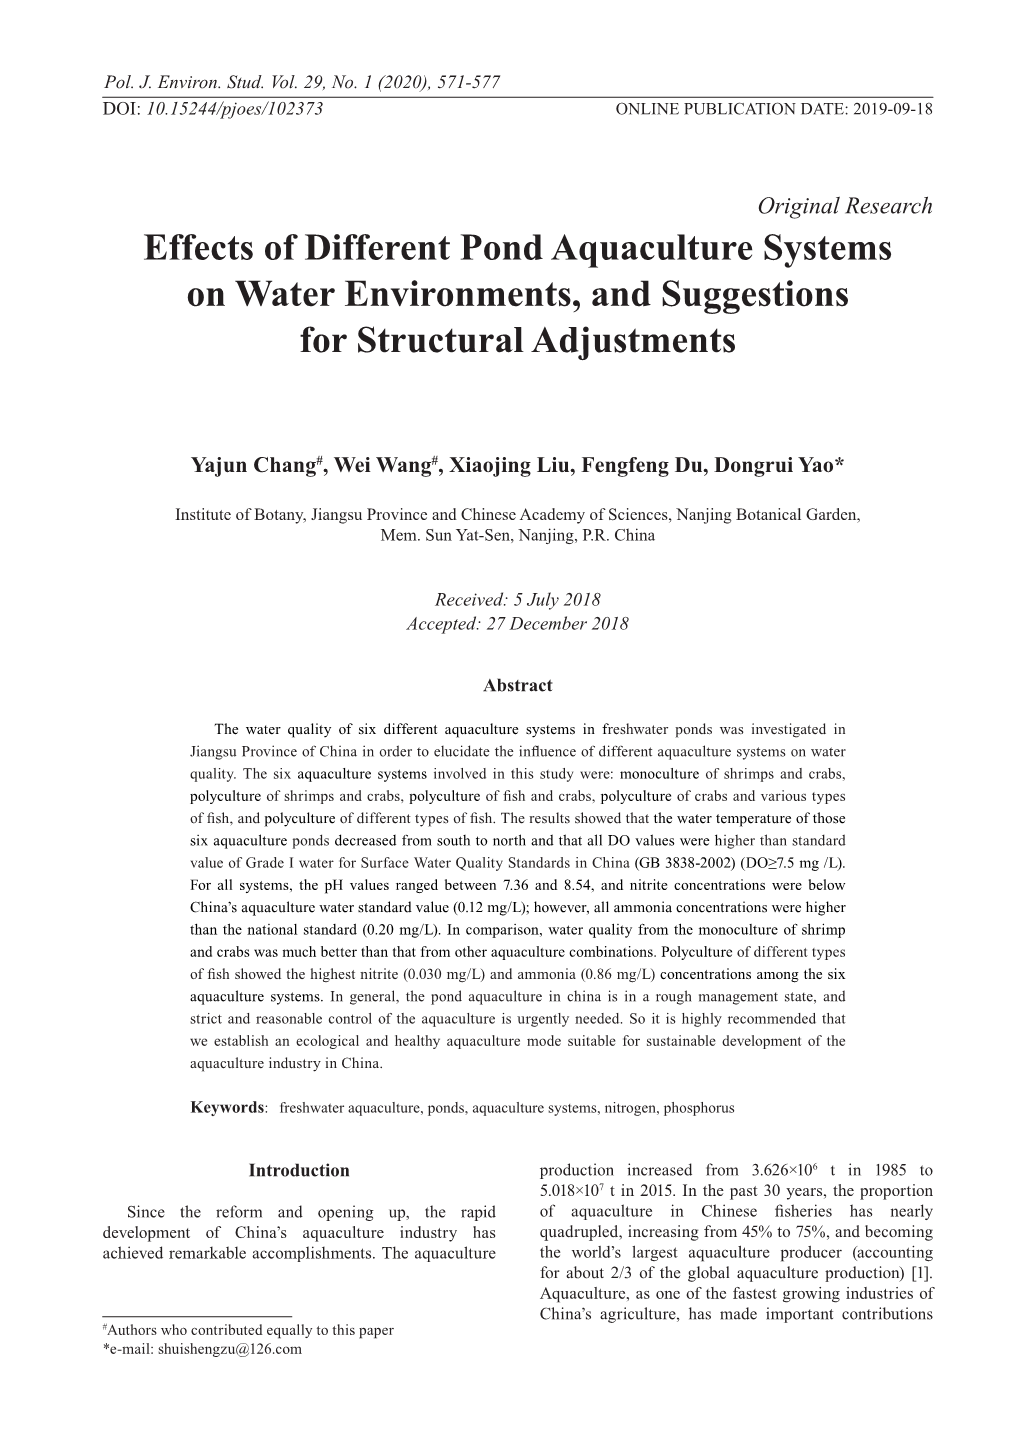 Effects of Different Pond Aquaculture Systems on Water Environments, and Suggestions for Structural Adjustments